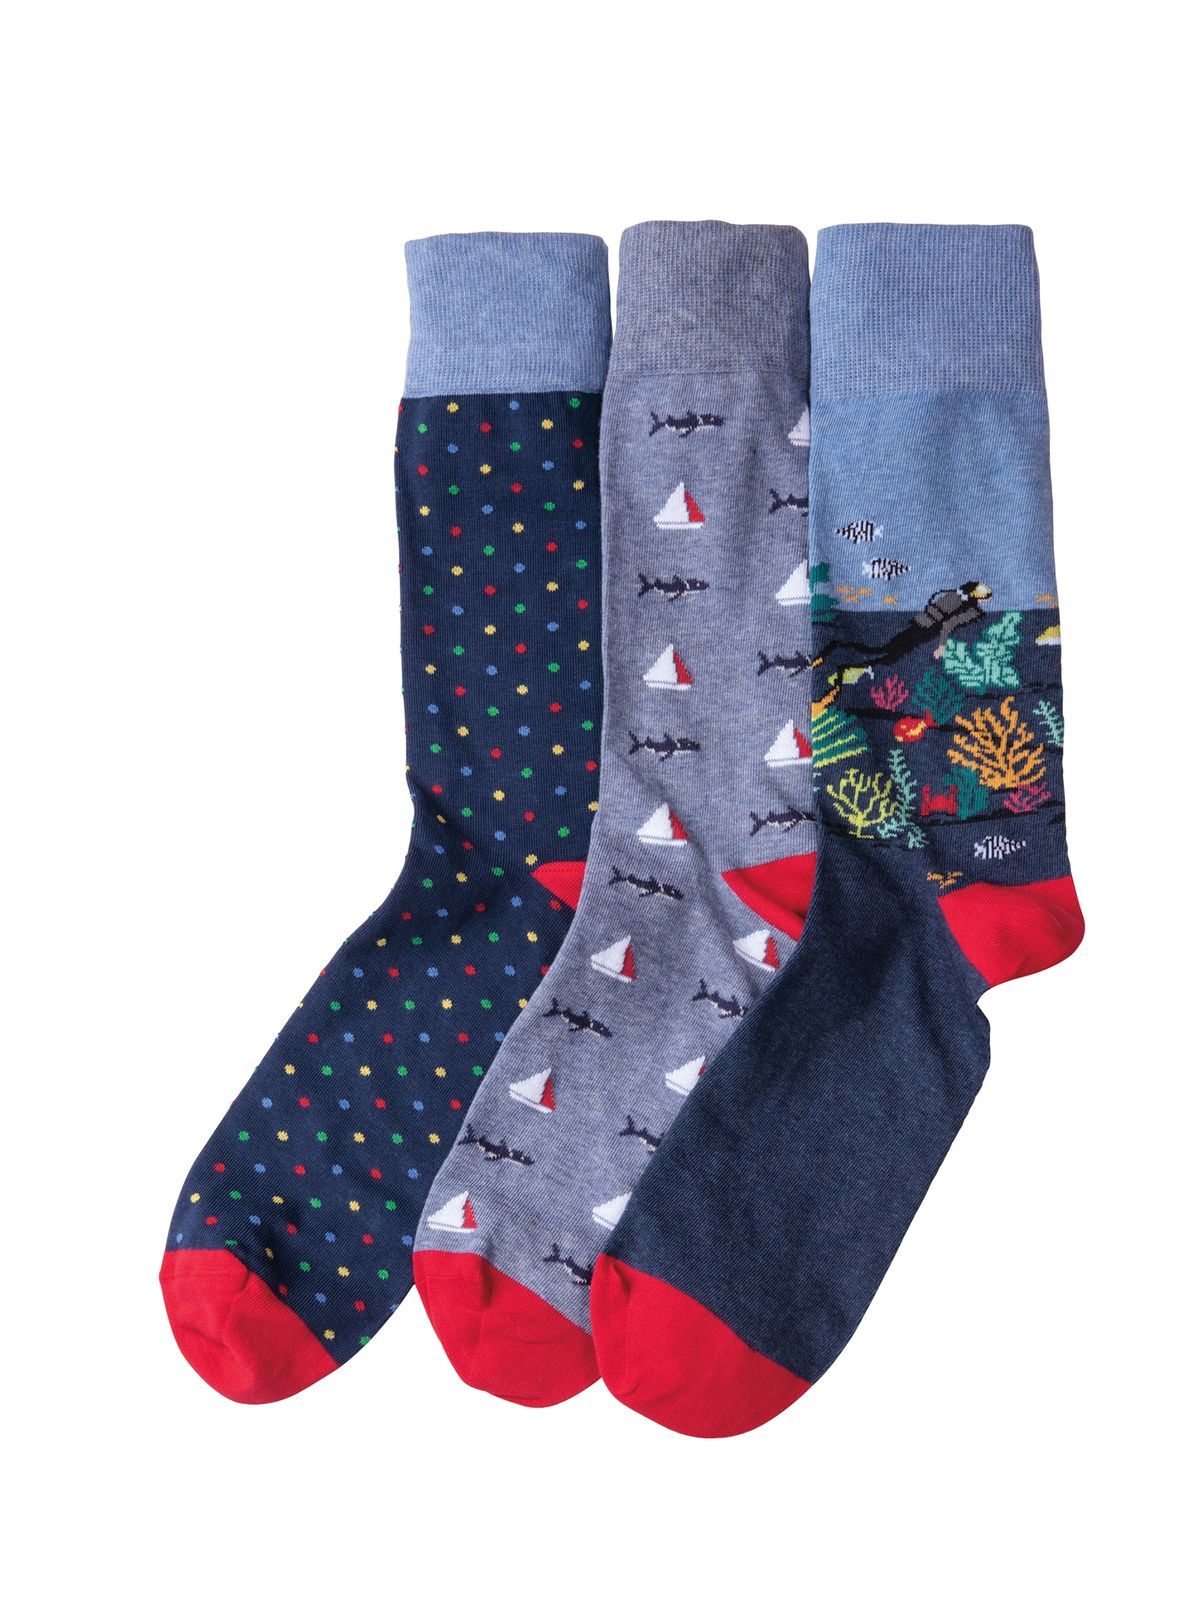 Pack of 3 Pairs Extremely Popular Navy/Red Cardiff Socks by HKM 